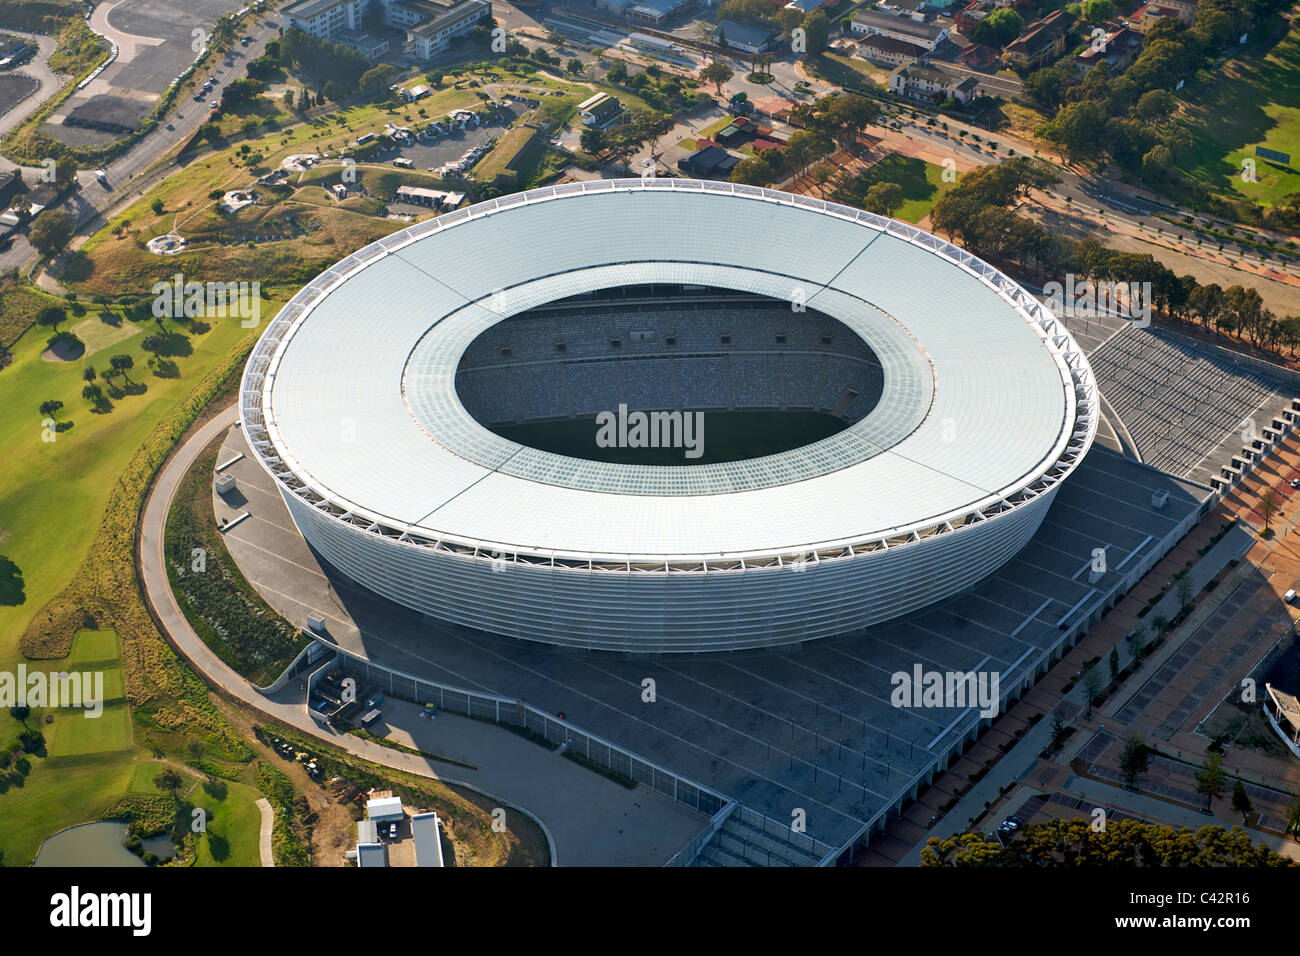 Aerial view of the Green Point stadium in Cape Town, South Africa. It was built for the FIFA 2010 world cup. Stock Photo